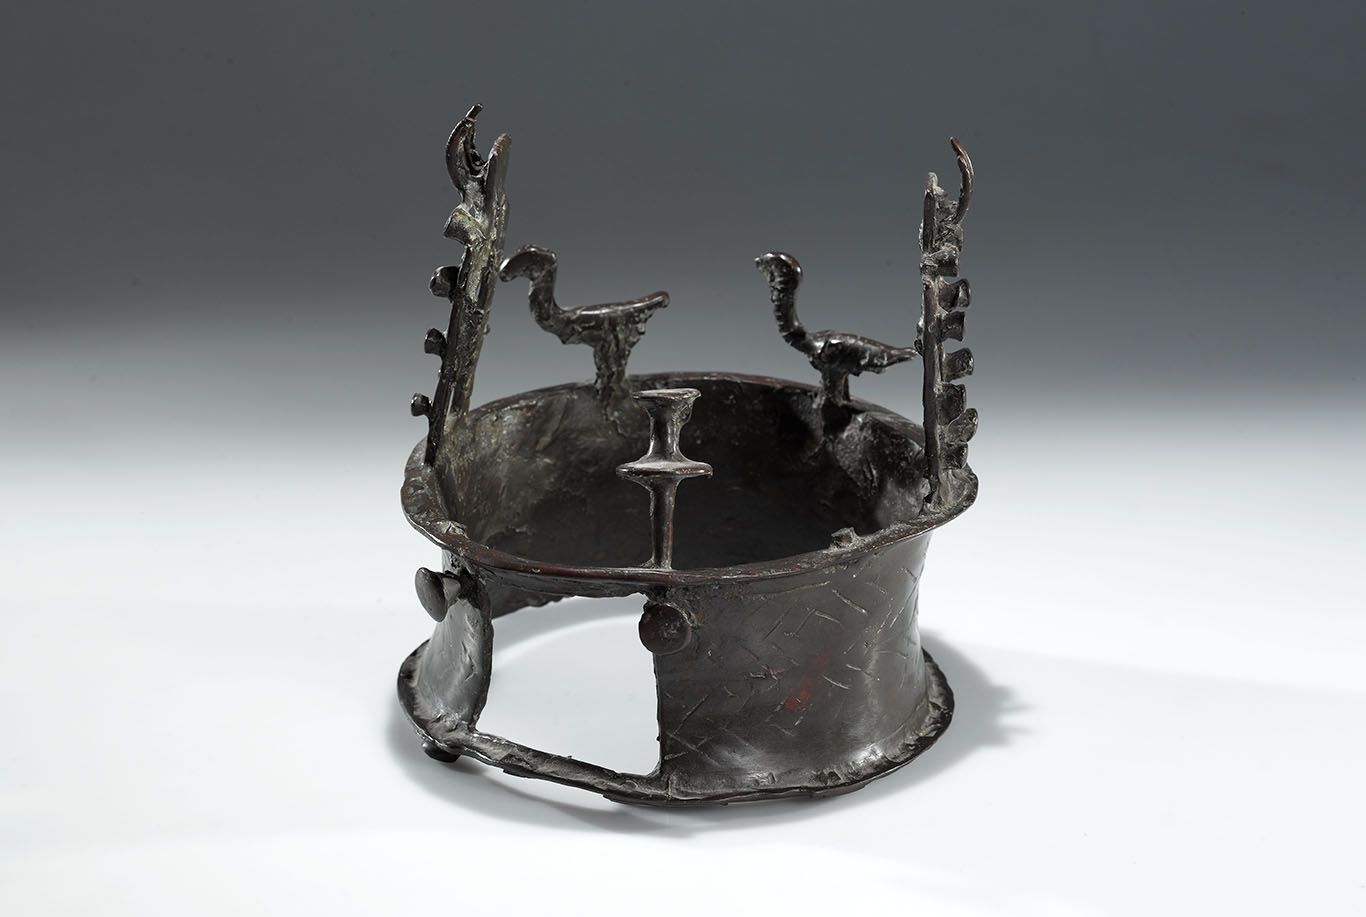 Masters of Fire: Copper Age Art from Israel Opens February 13